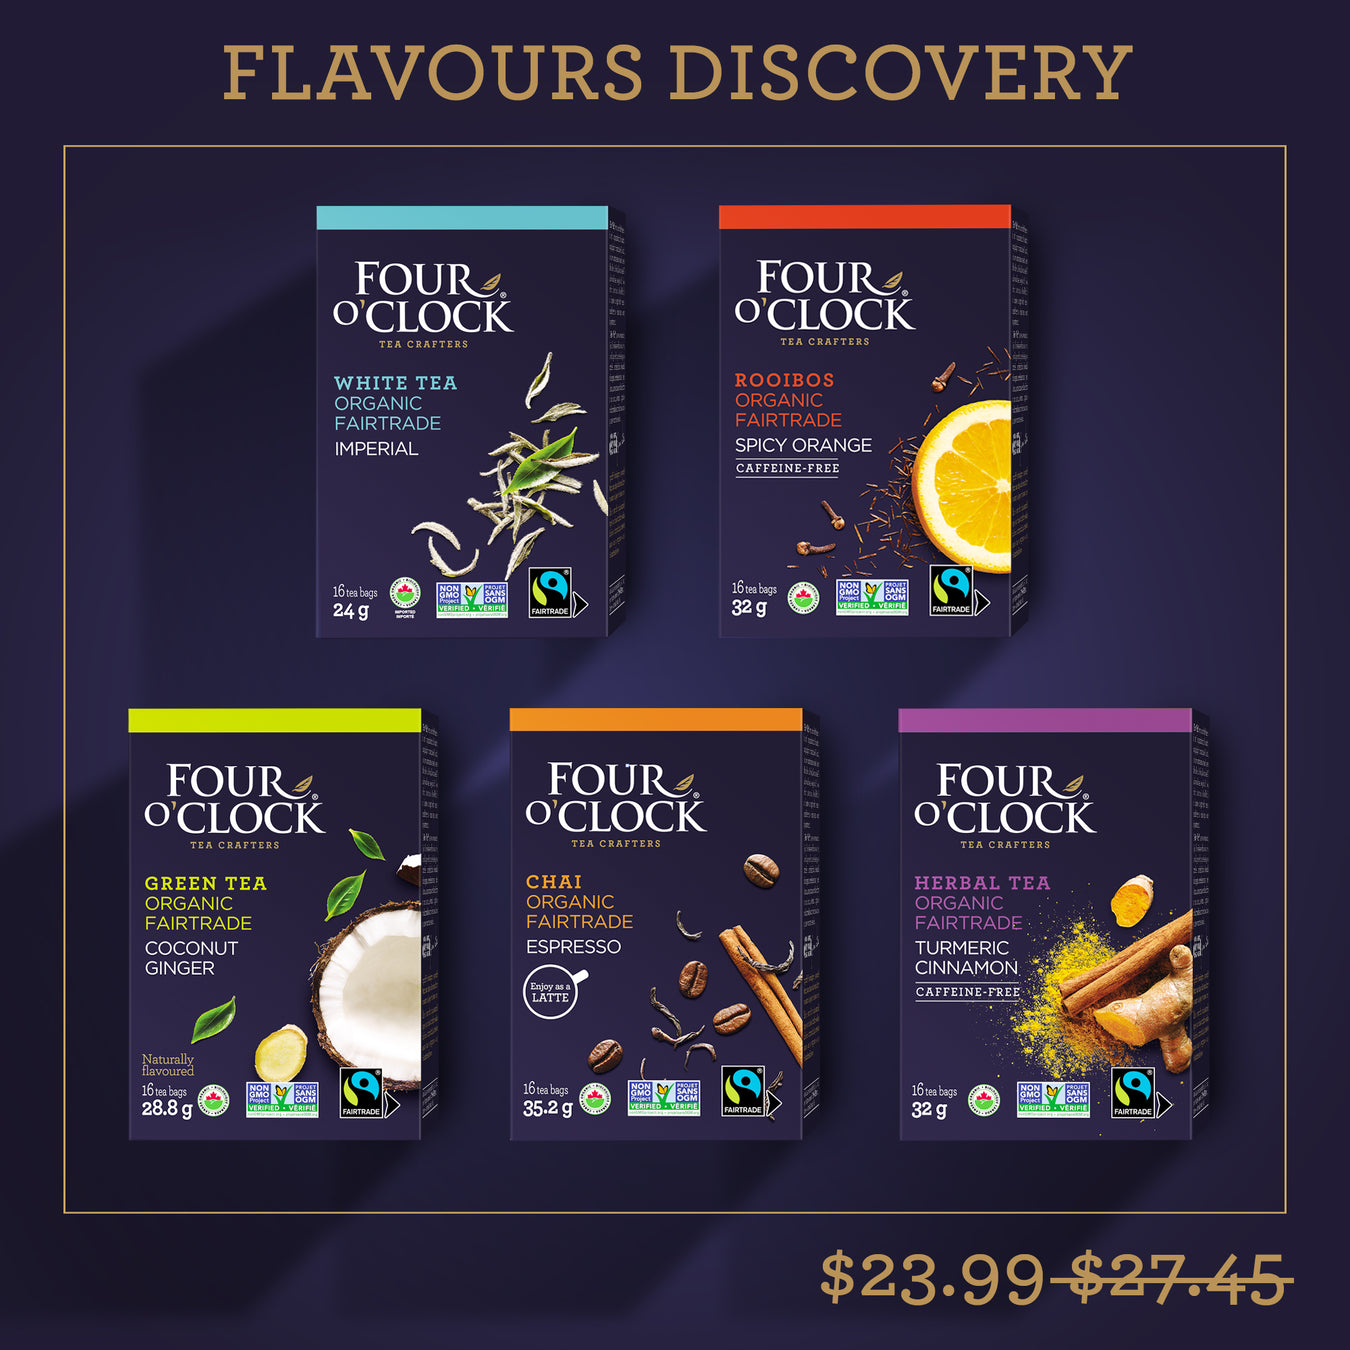 Flavours Discovery